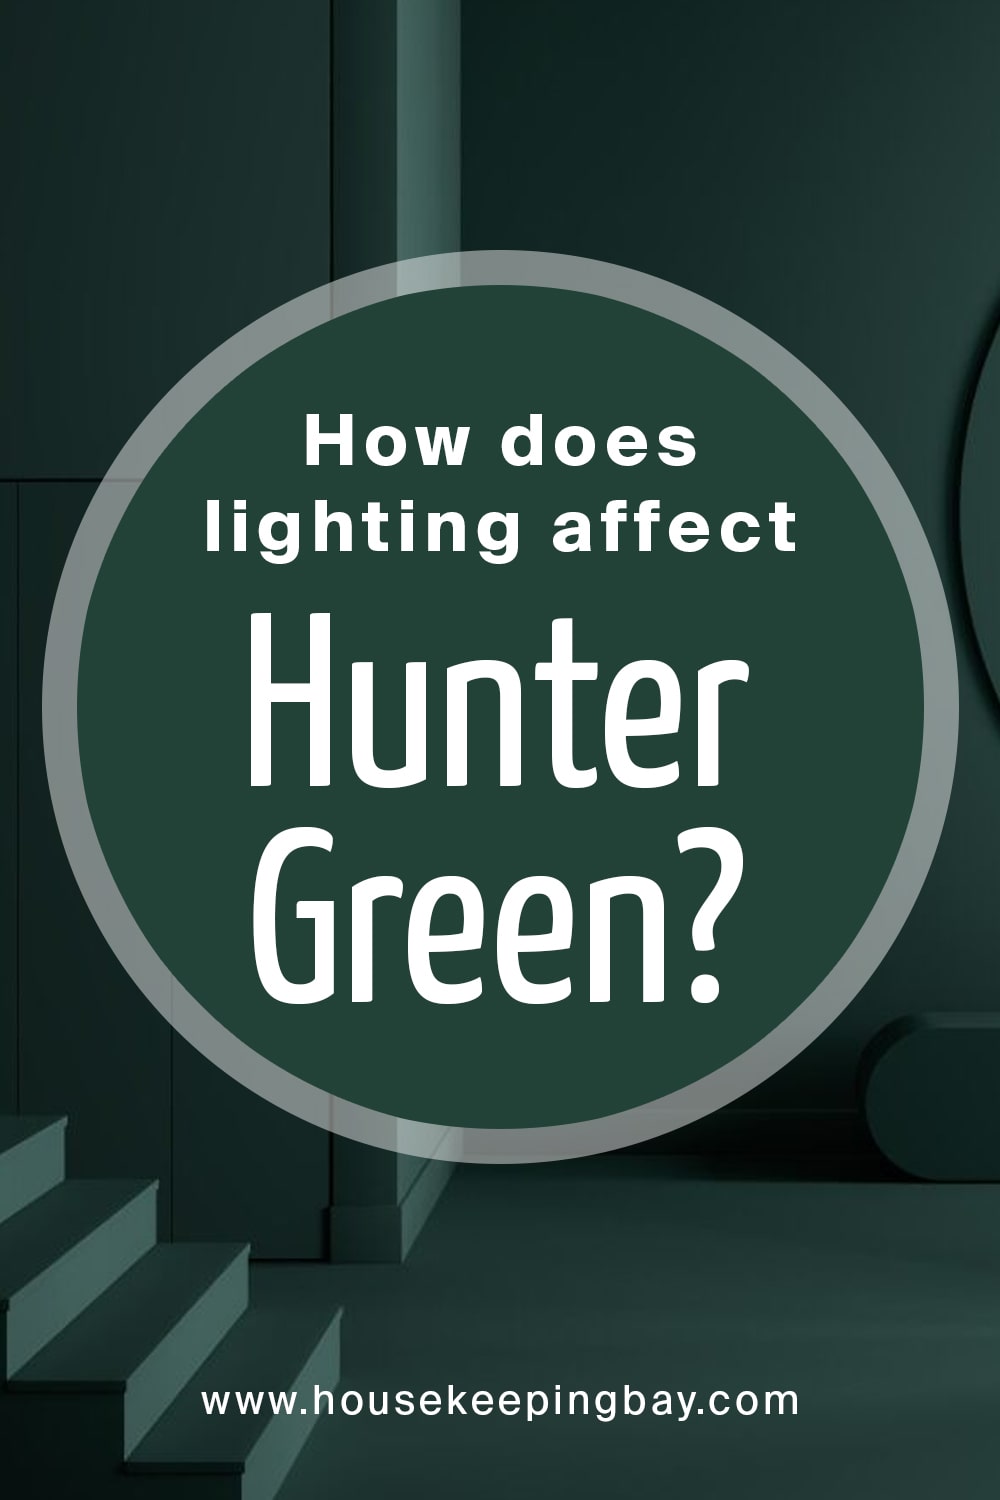 How does lighting affect Hunter Green